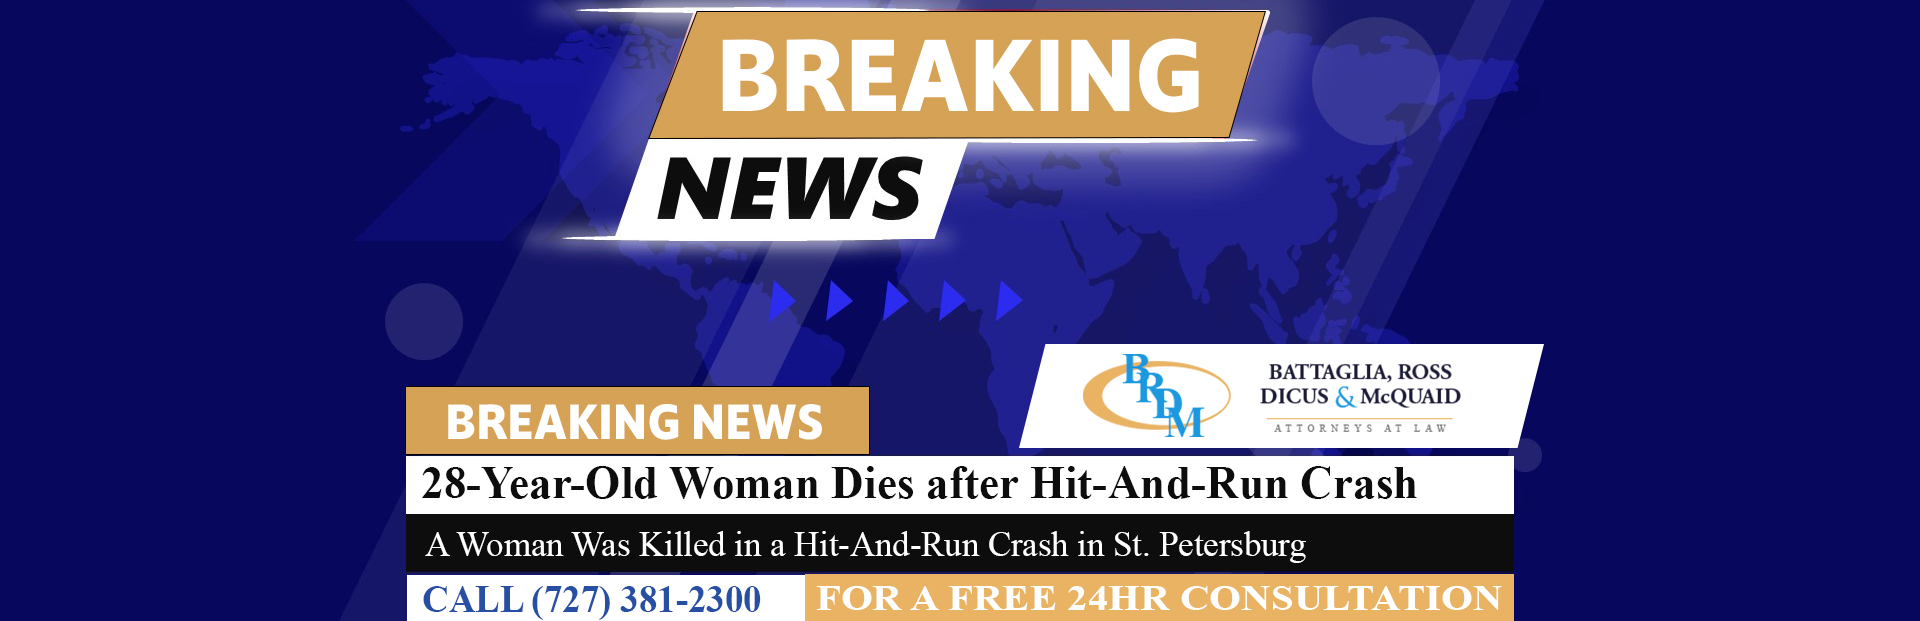 [05-08-23] 28-Year-Old Woman Dies after Hit-And-Run Crash in St. Petersburg